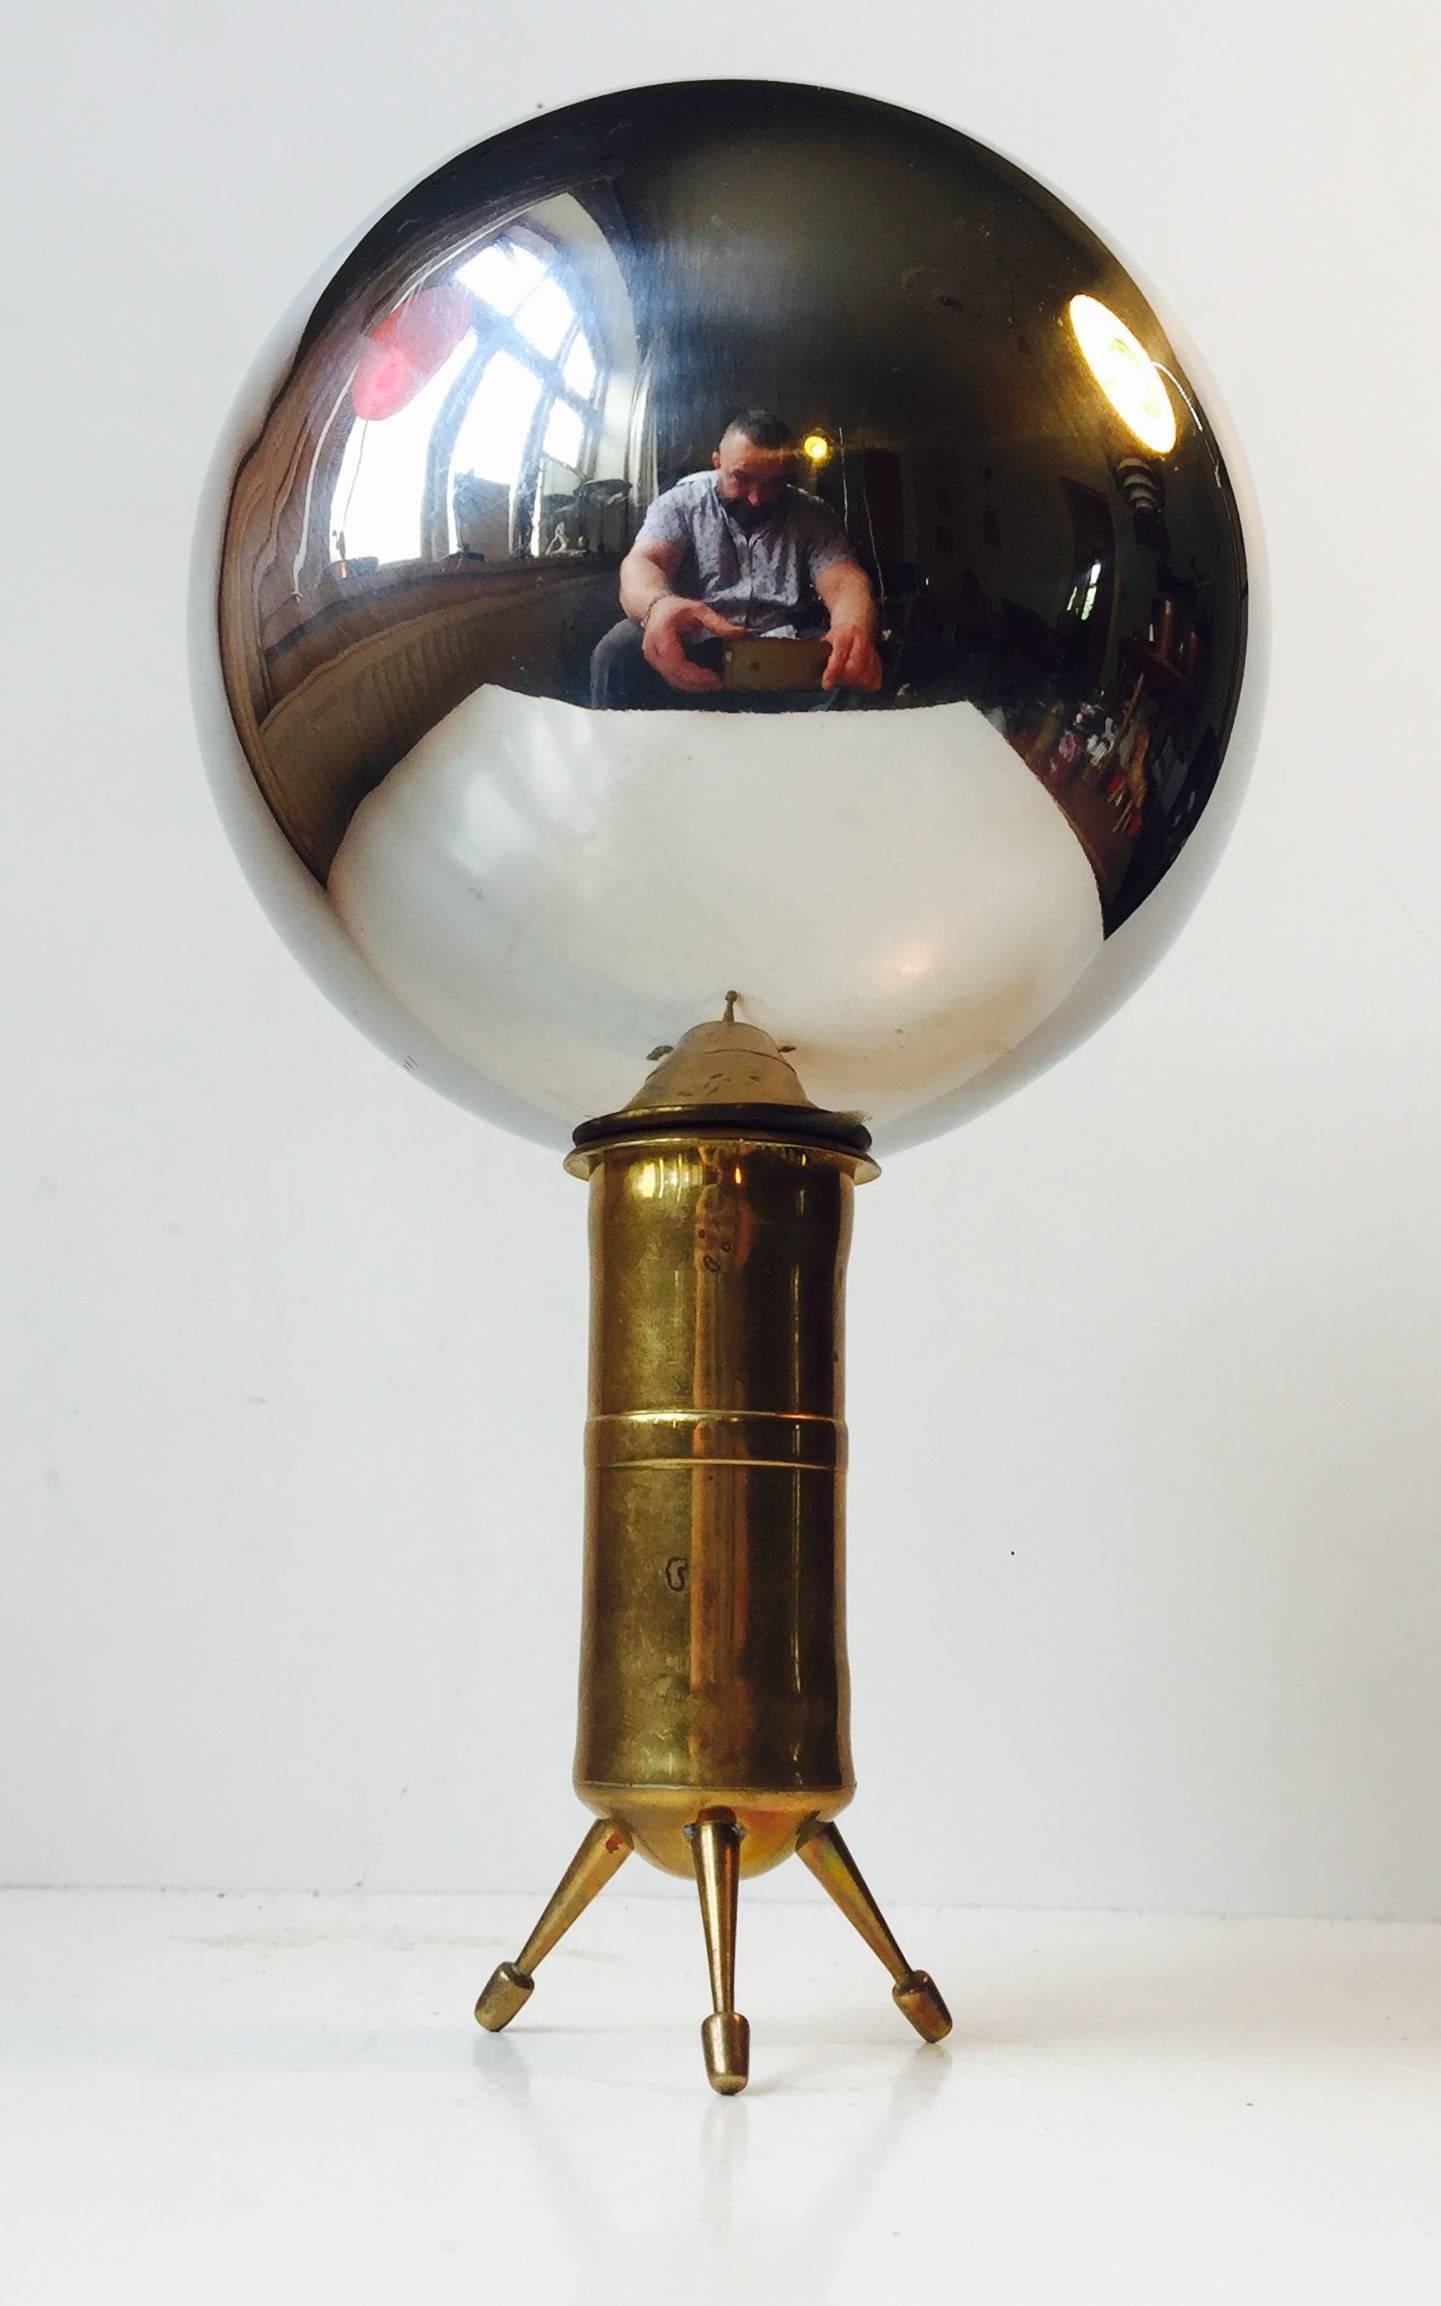 This is a very curious and unusual item. Looking in to this elevated mirror metal sphere the entire room is reflected. You can see things that are in front of you and to the sides. This adds another dimension to the common mirror that 'only'